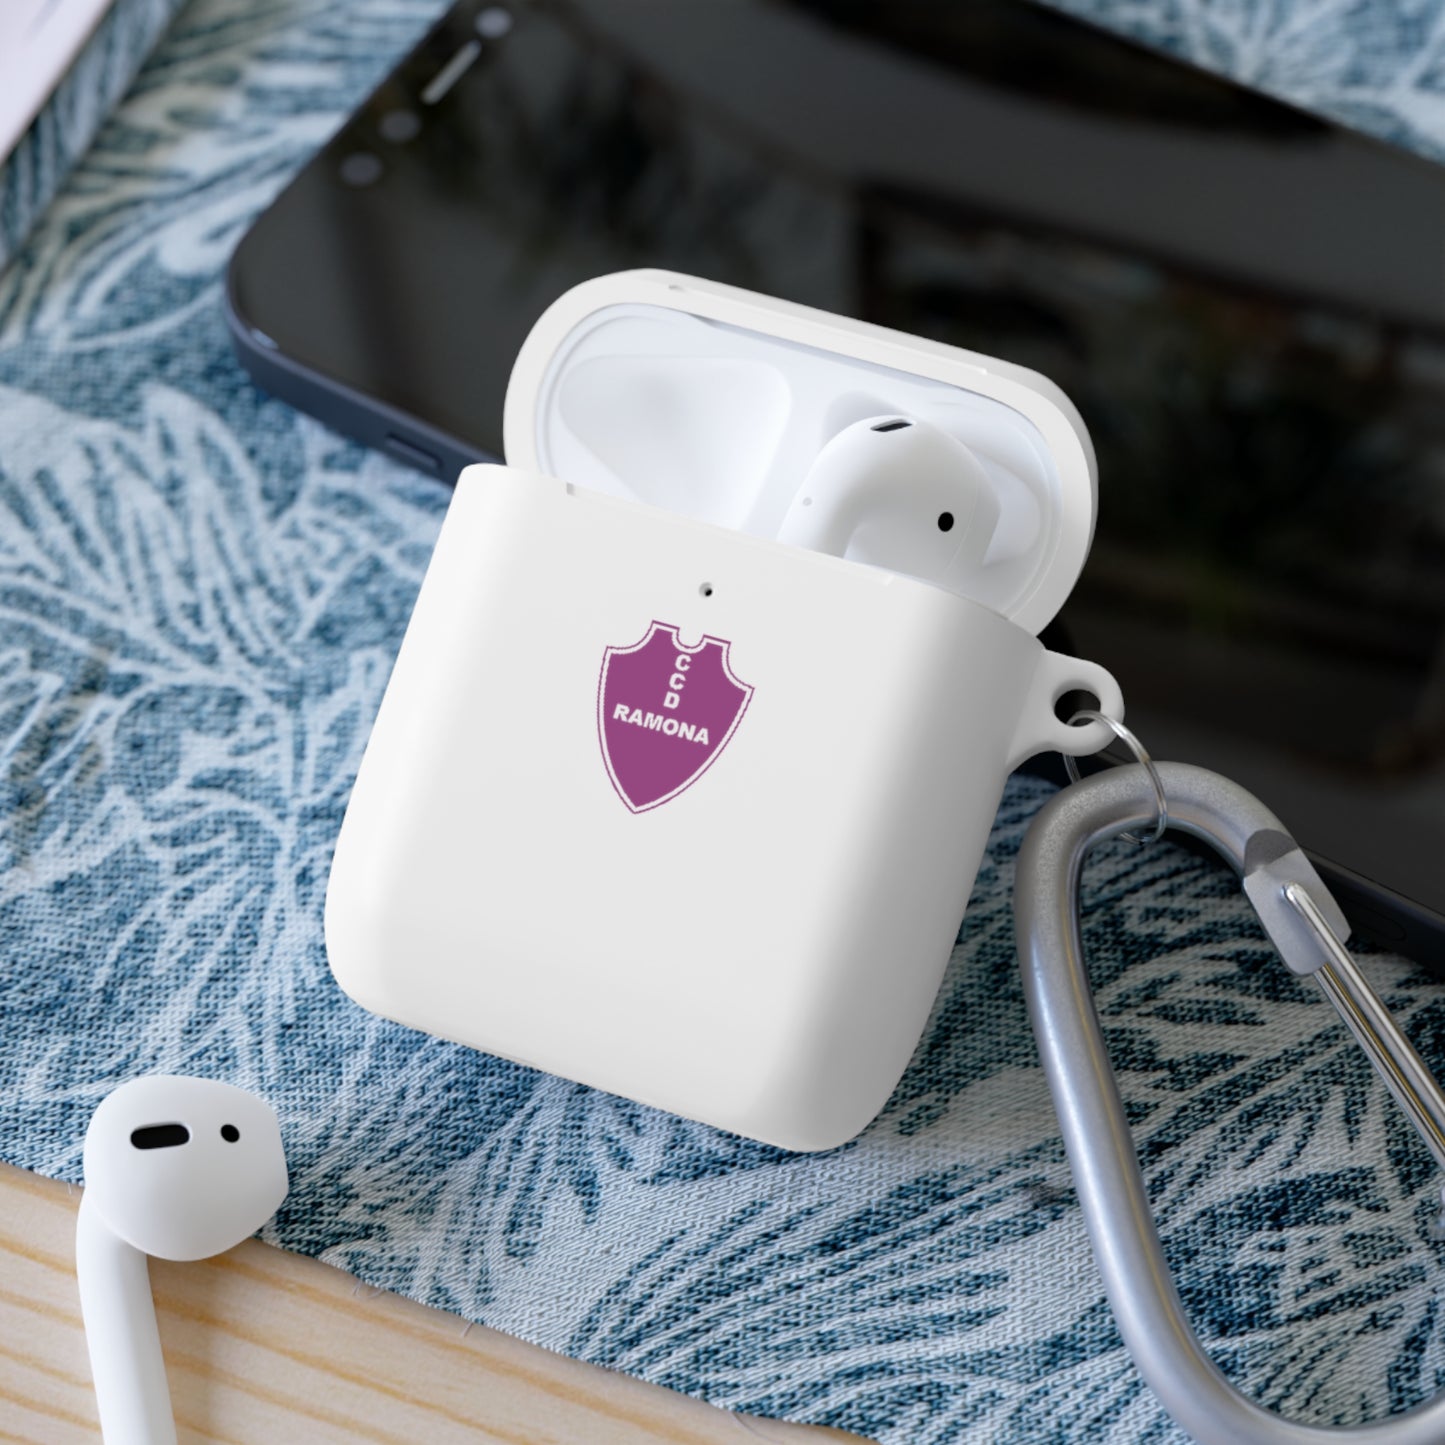 Club Cultural y Deportivo Ramona de Ramona AirPods and AirPods Pro Case Cover